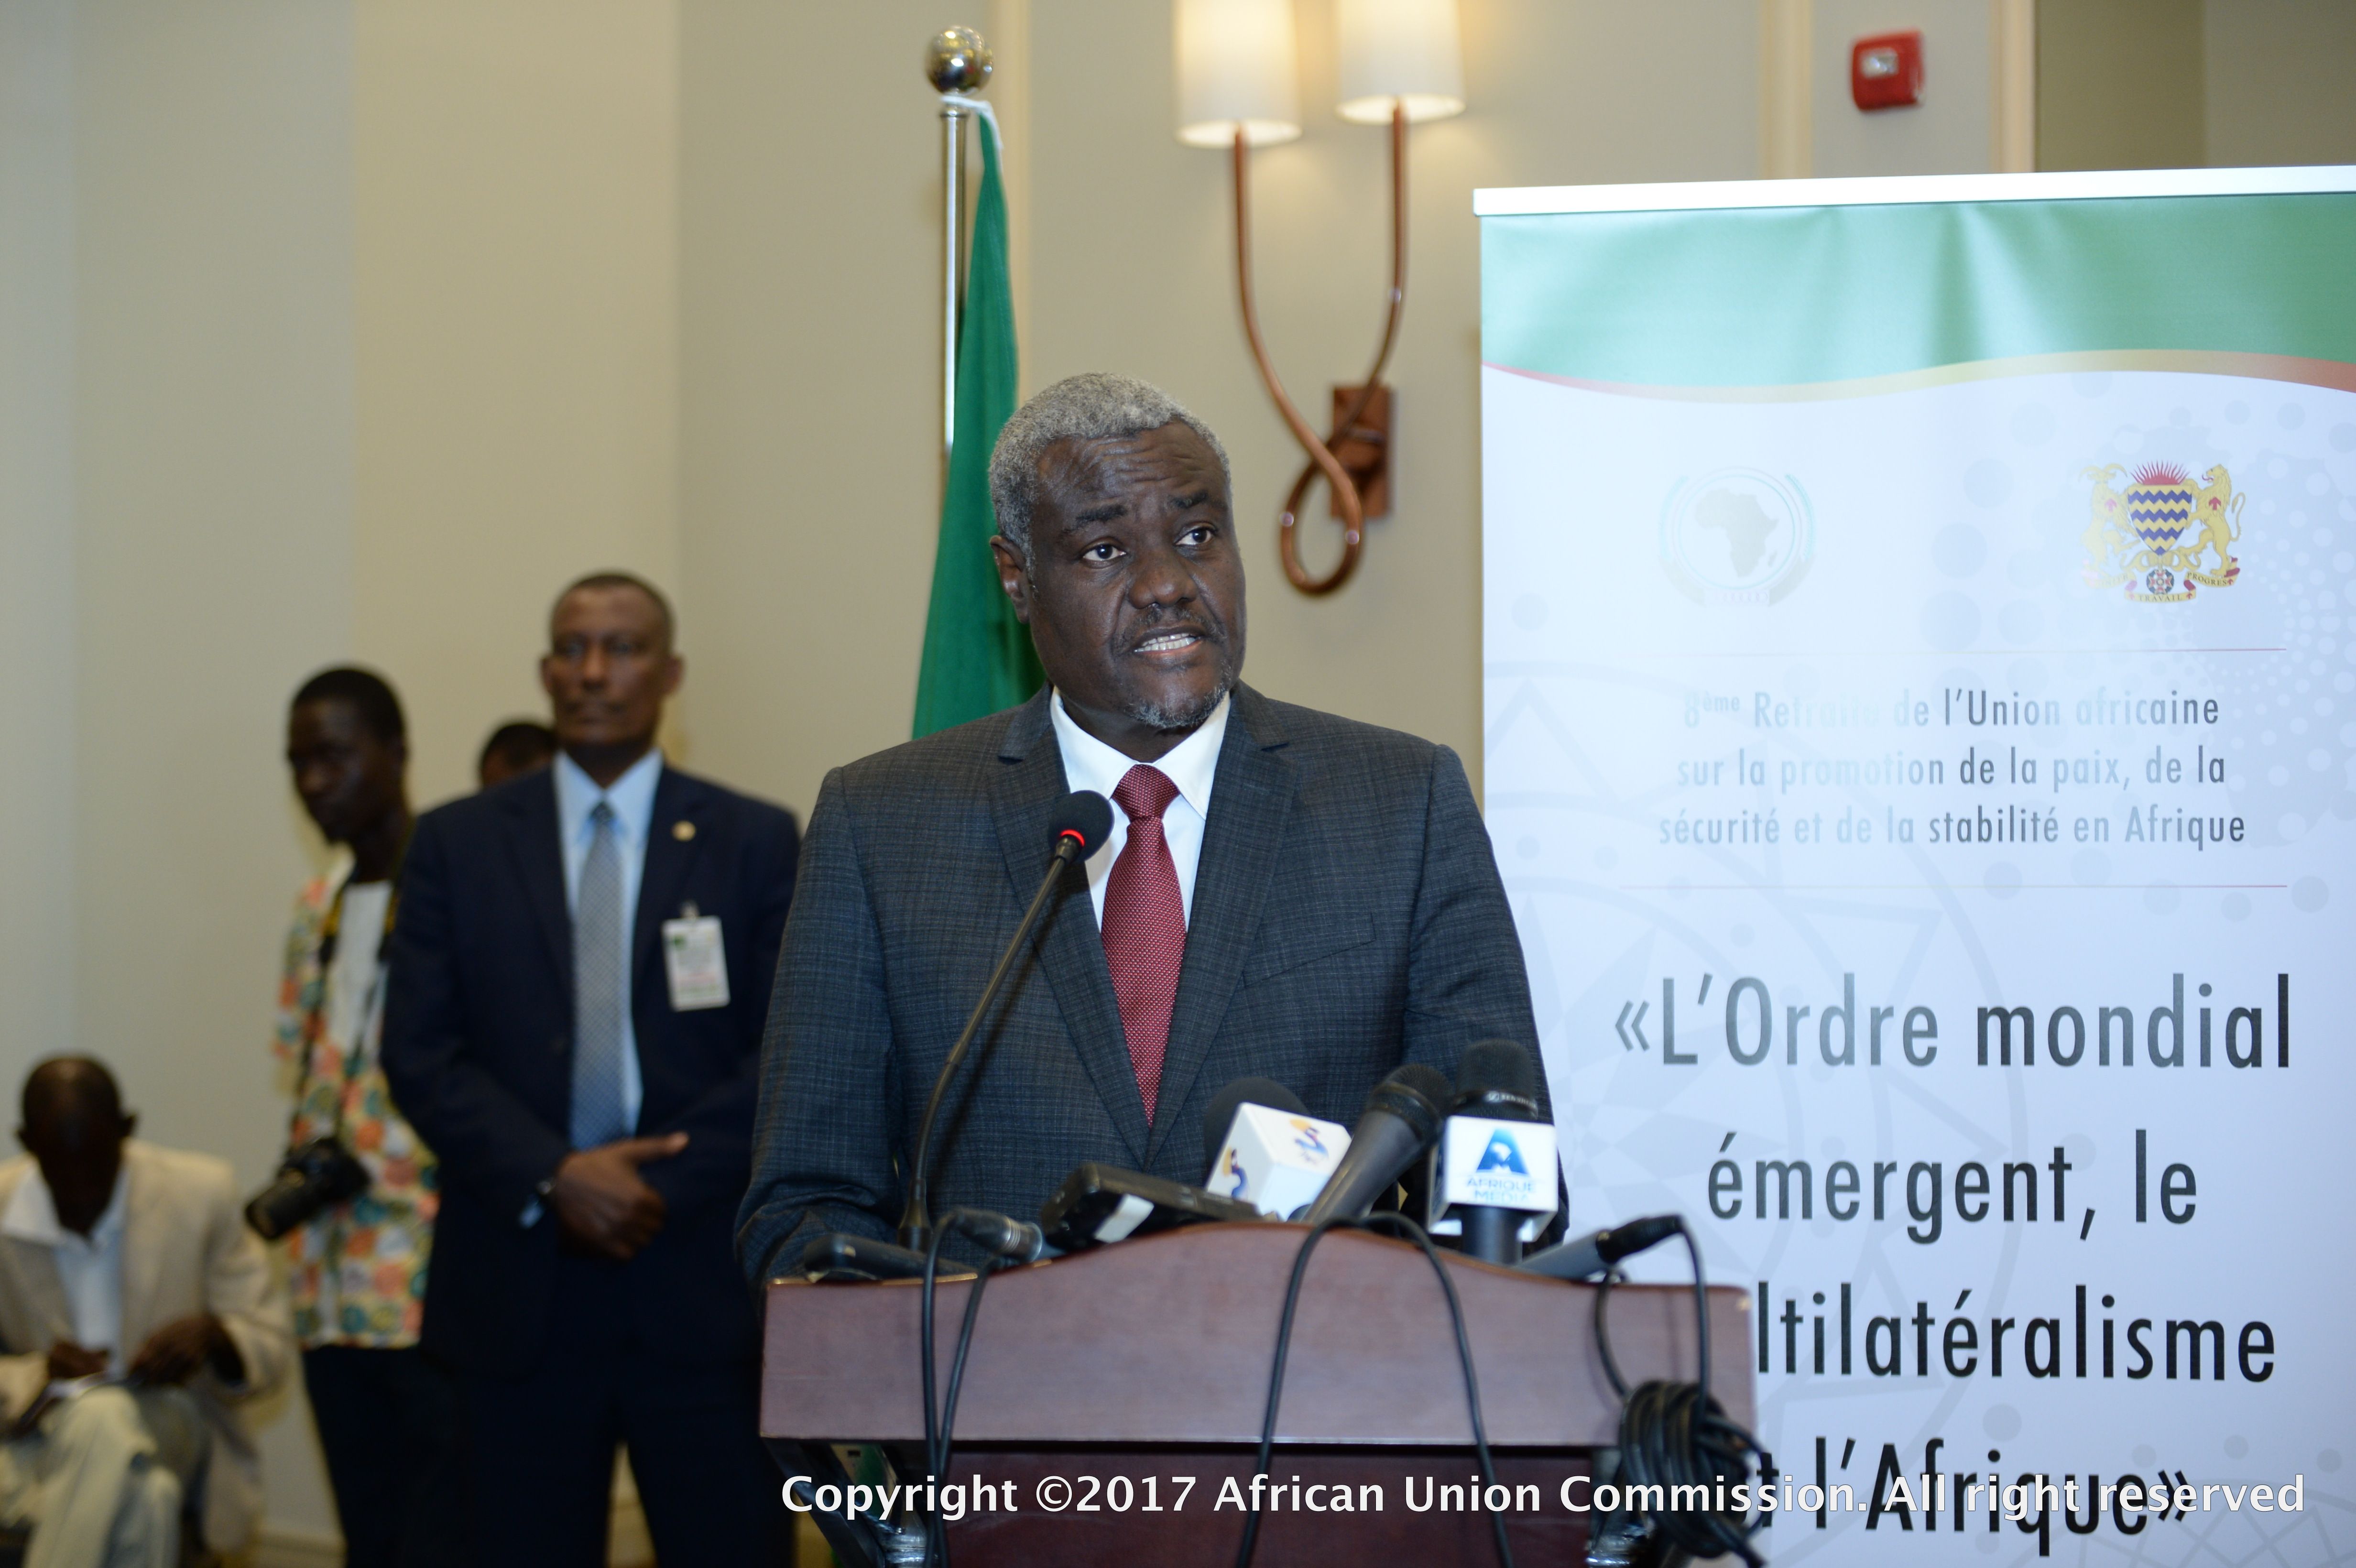 Speech by the AUC Chairperson, H.E. Moussa Faki Mahamat at the Opening ceremony of the 8th High-Level AU Retreat on the Promotion of Peace, Security and Stability in Africa in Ndjamena, Chad